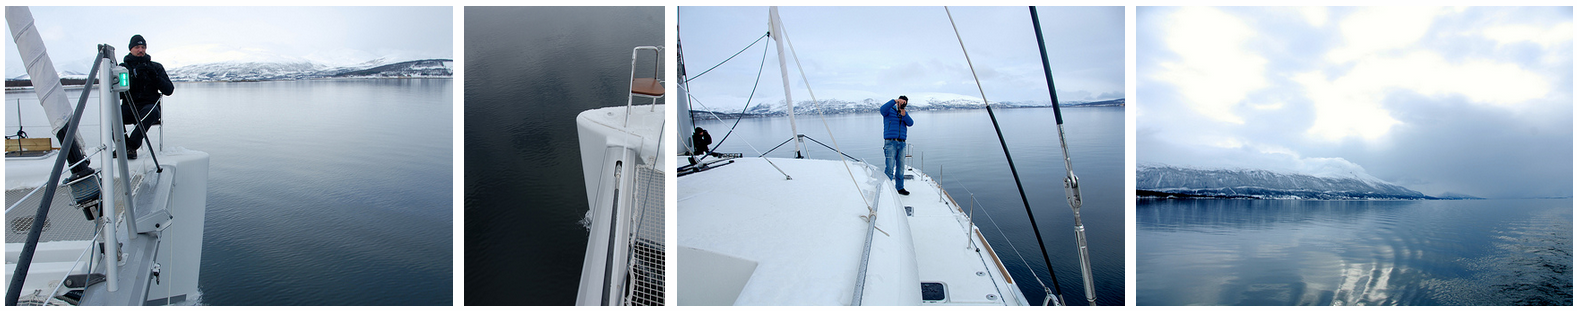 FjordCruise | Tromso | Easter | Lovely weather